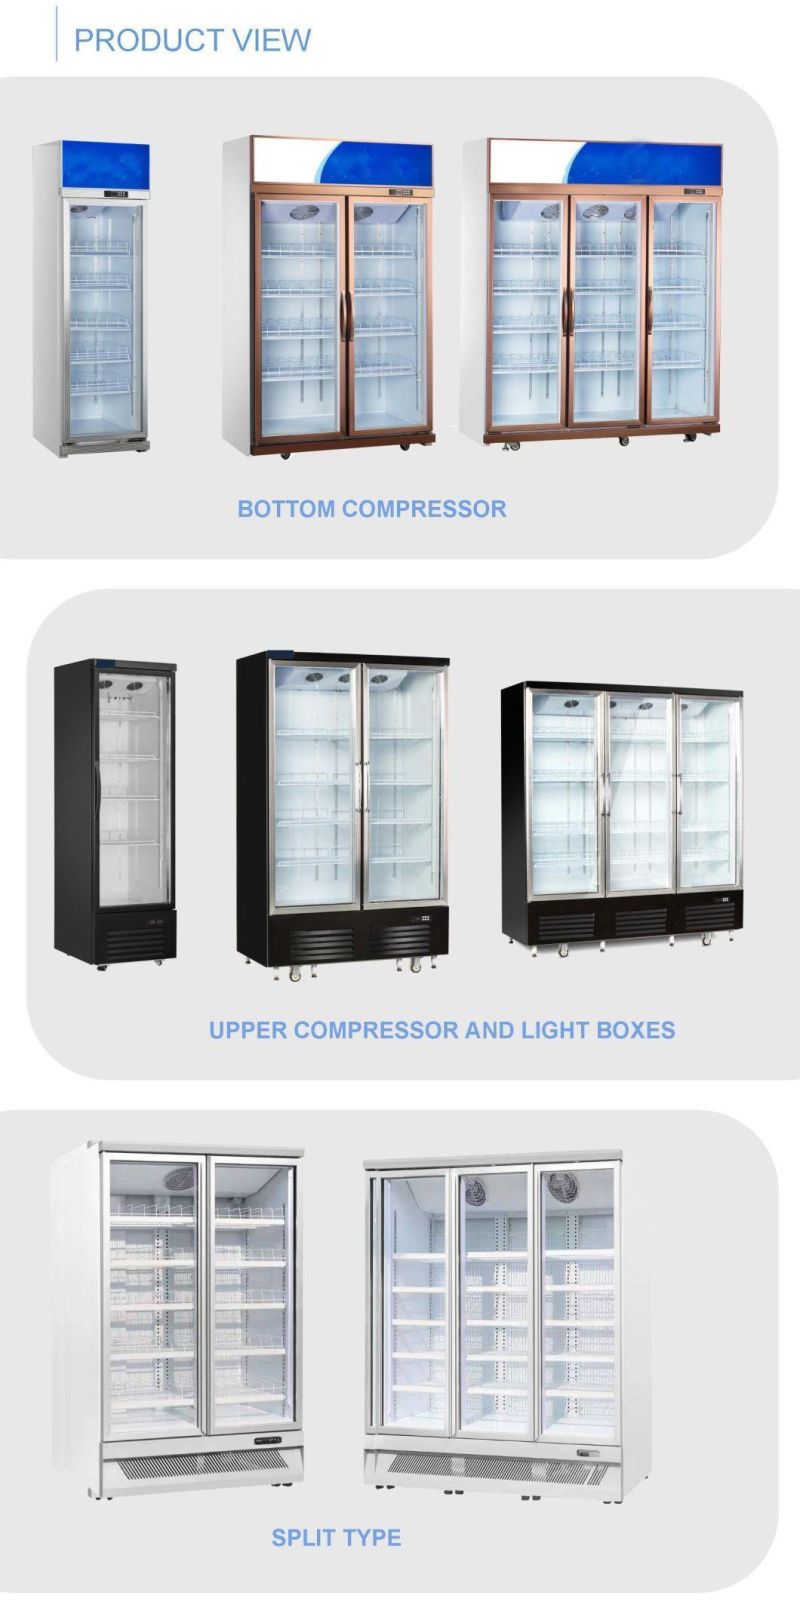 Catering Restaurant Kitchen Showcase Cake Pastry Cookies Display Cabinet